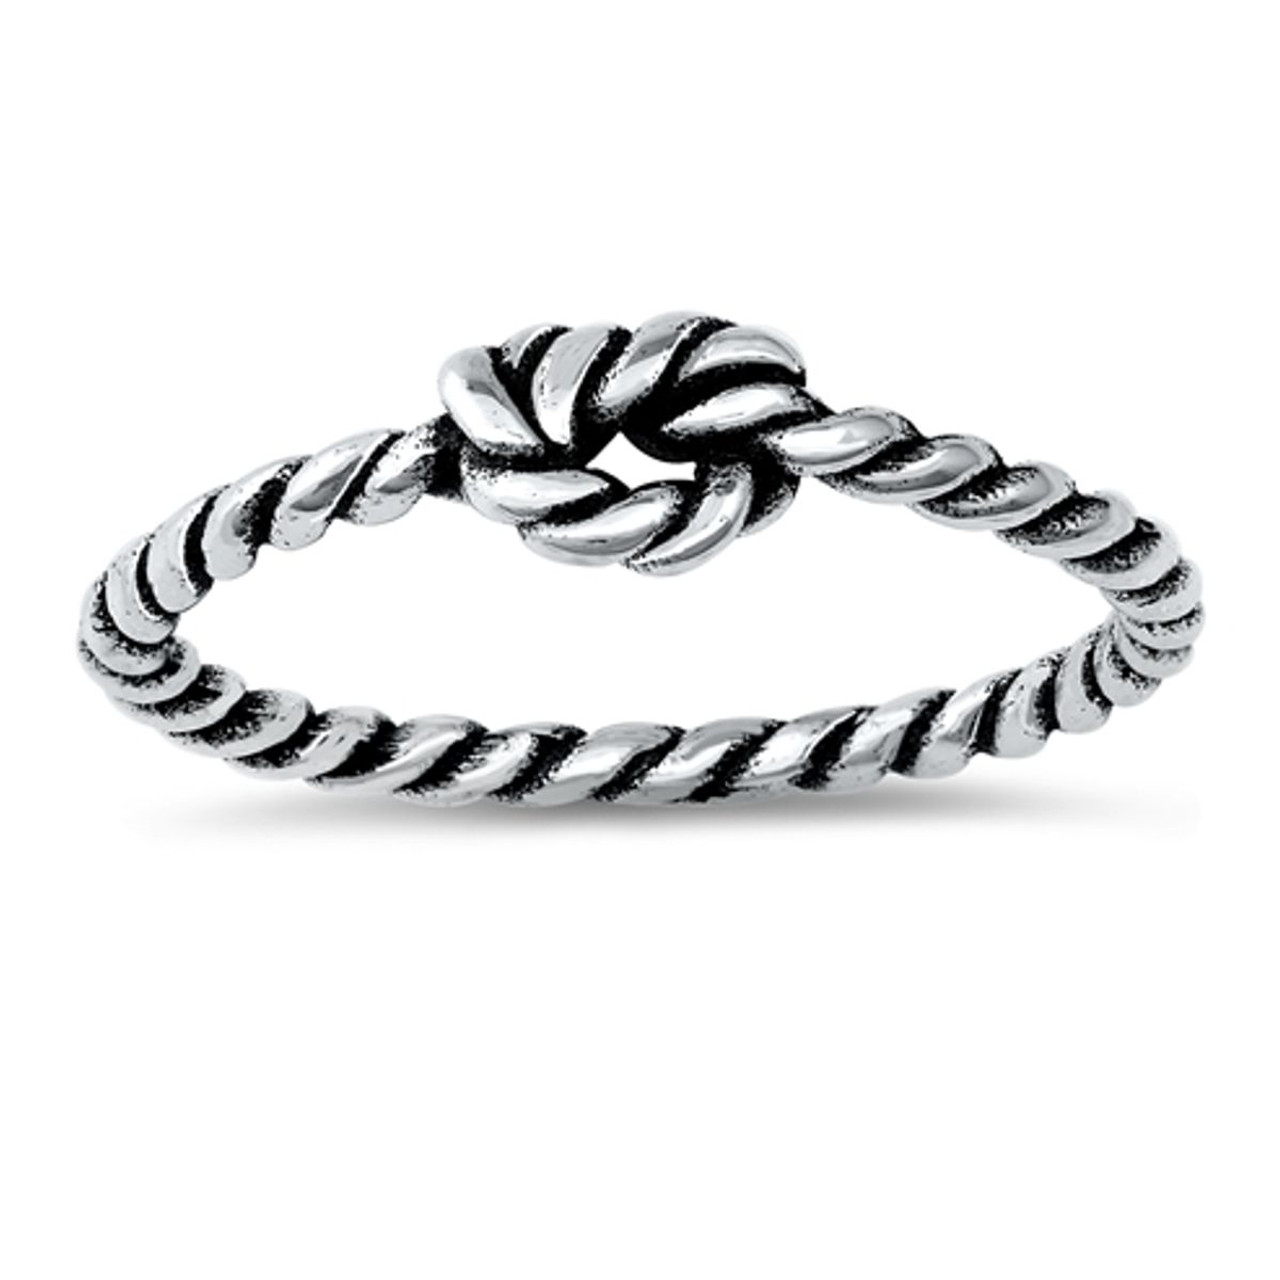 Wavy Rope Ring Genuine Sterling Silver 925 Jewelry Oxidized Face Height 2 mm 